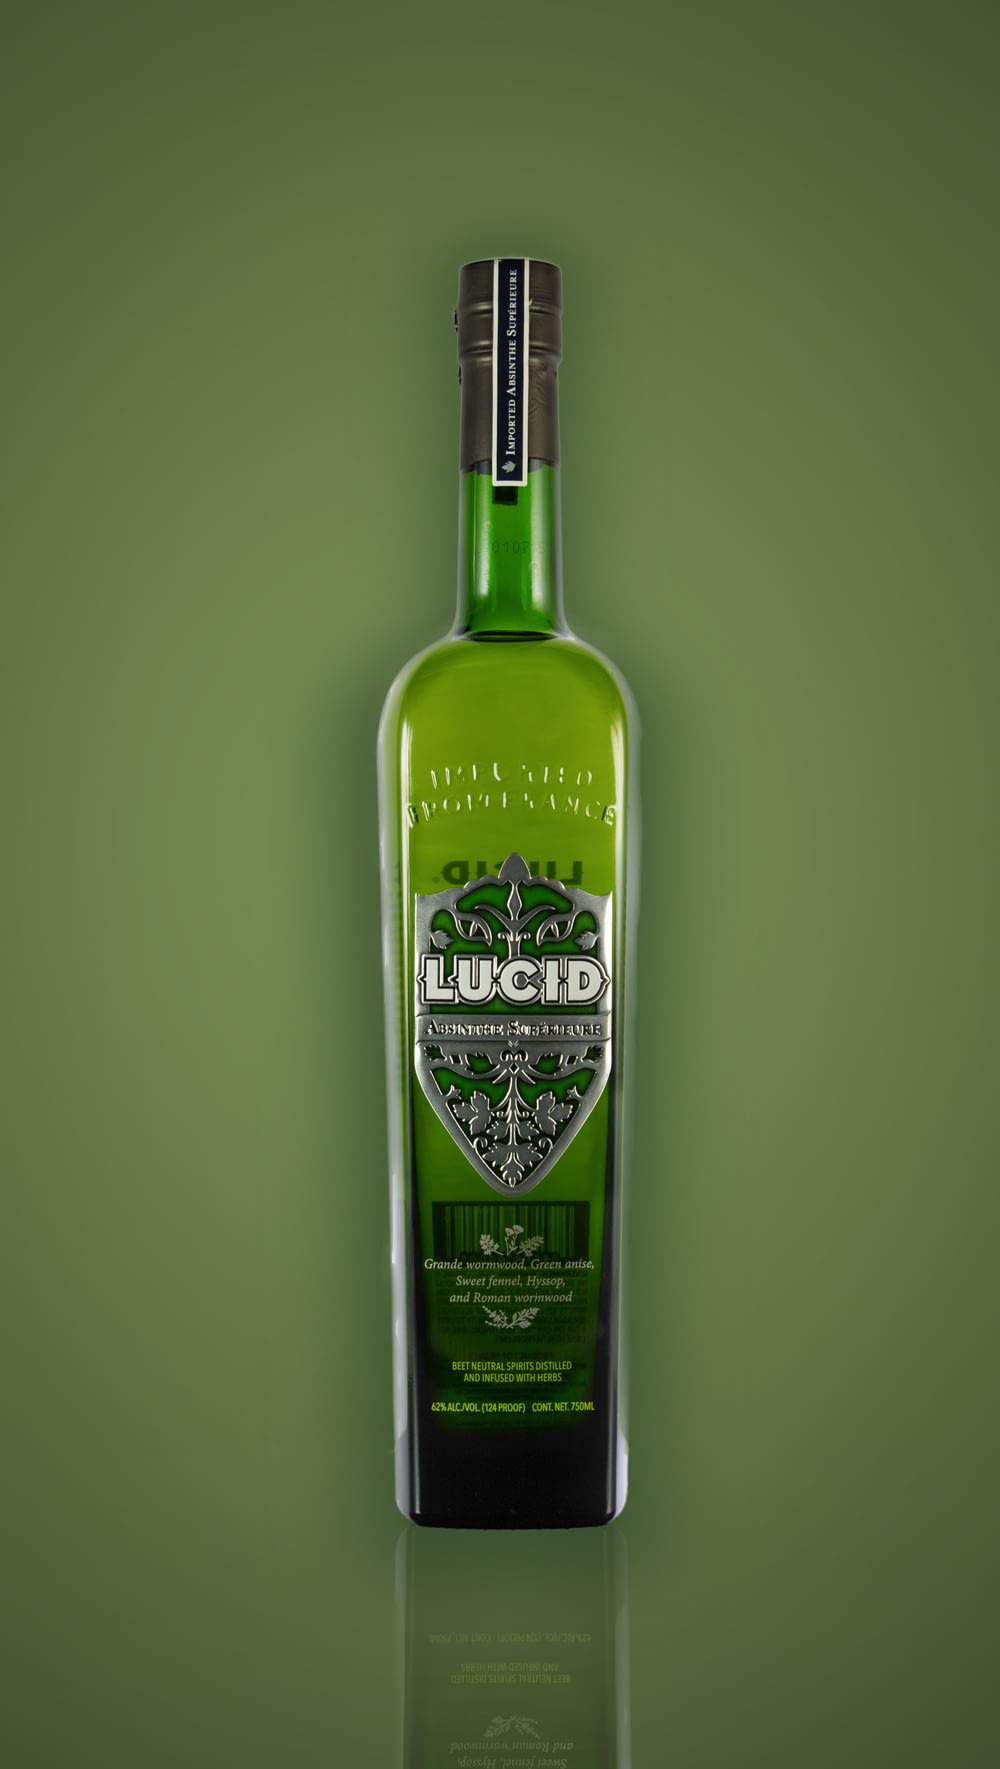 a bottle of liquor on a green background